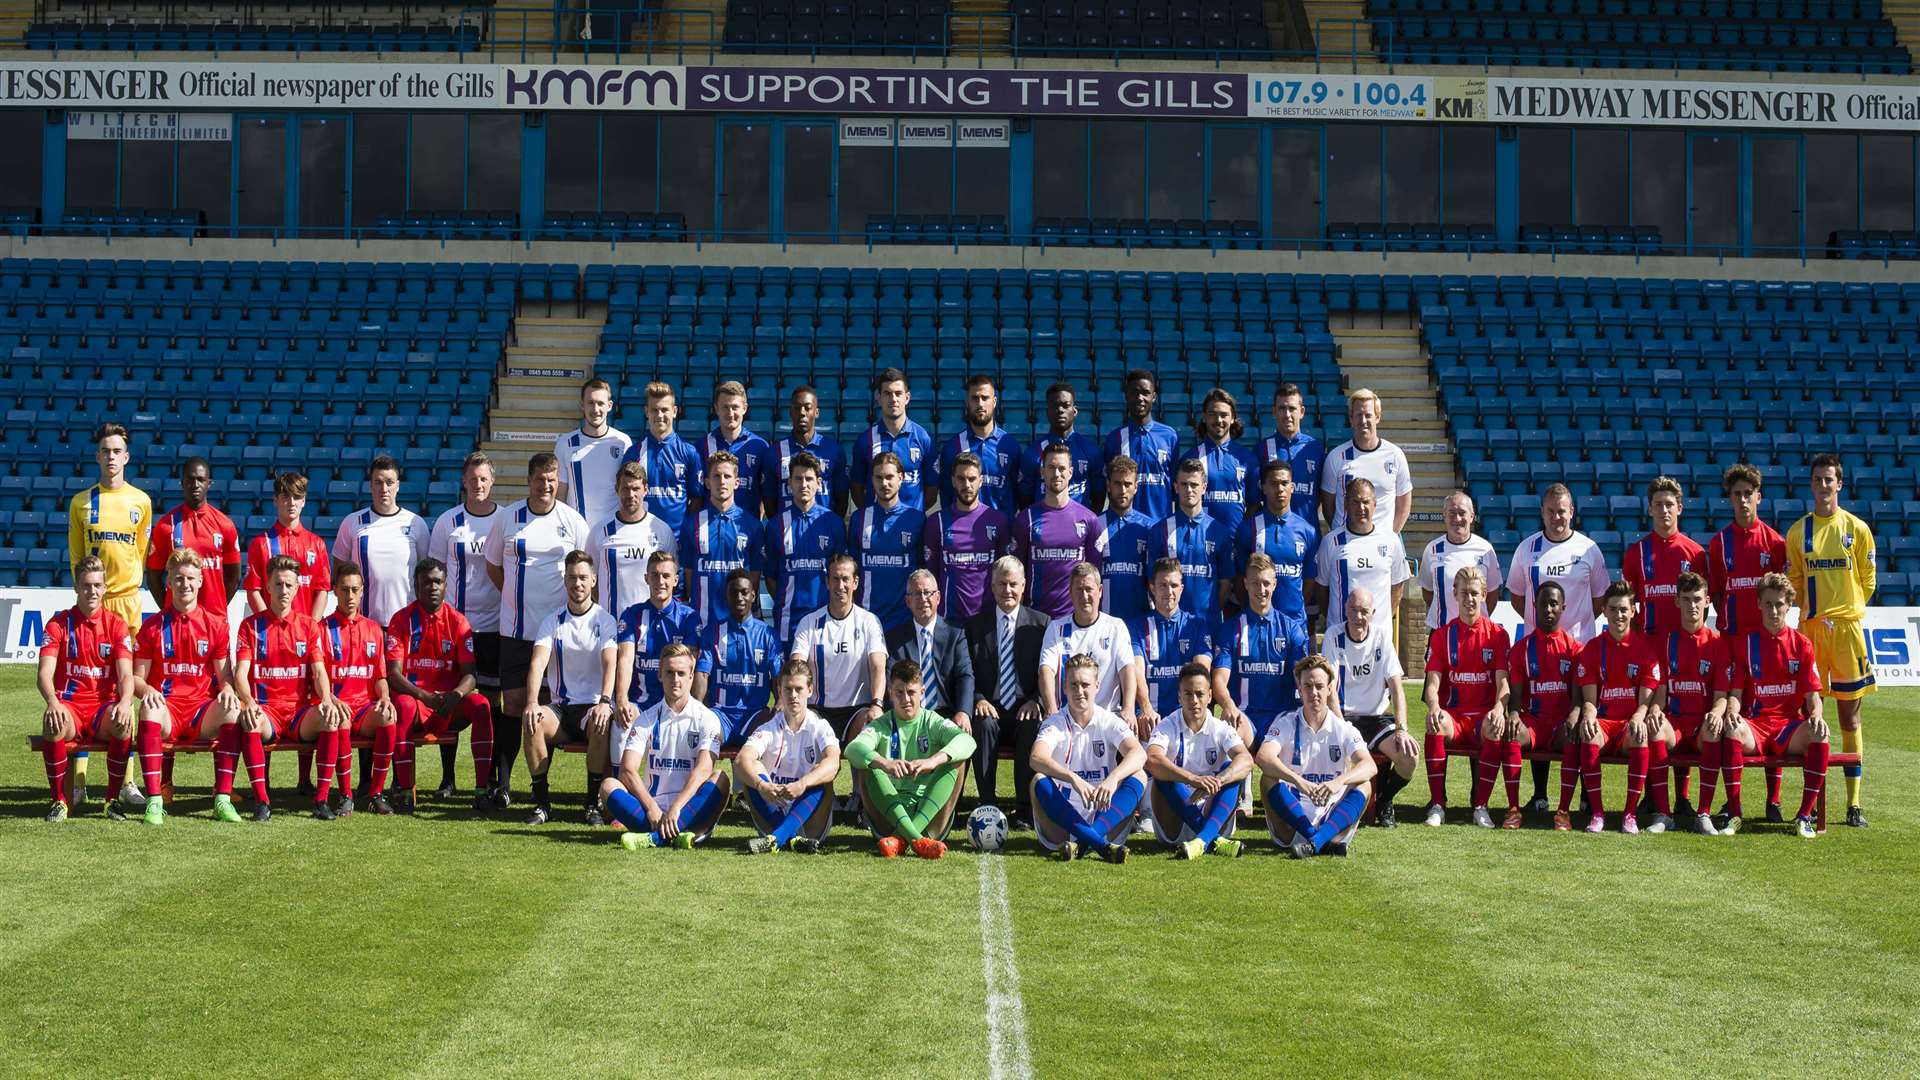 All of the Gillingham men's squads for 2015/16 Picture: Andy Payton